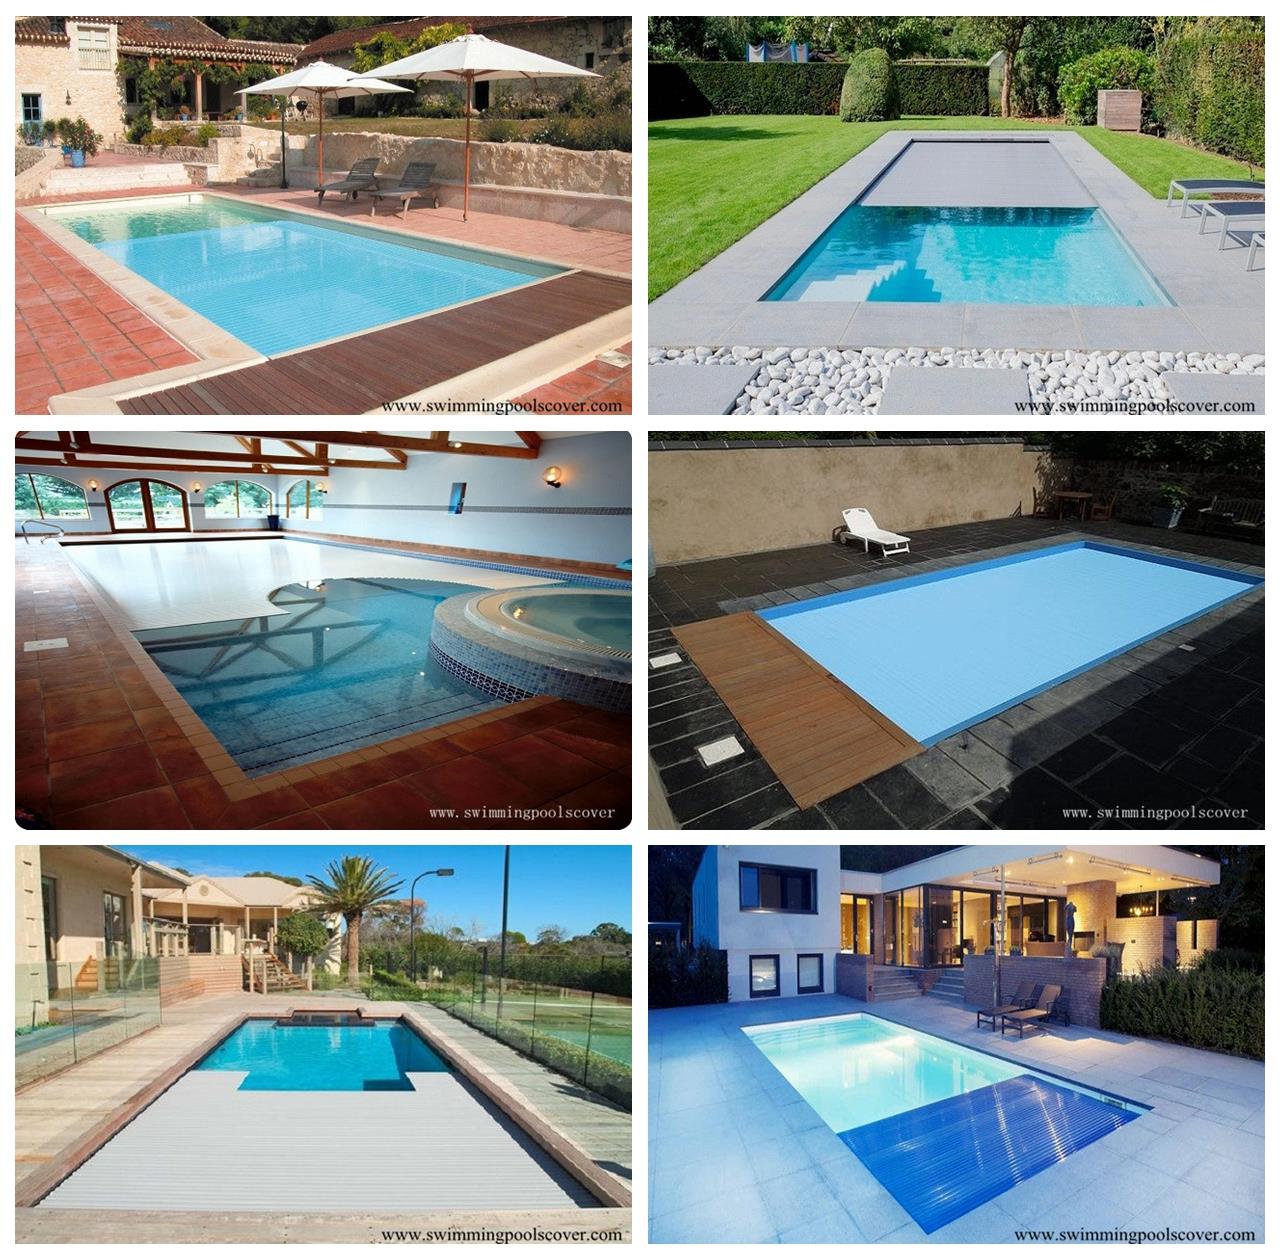 Automatic Pool Covers Inground To Save Energy.jpg